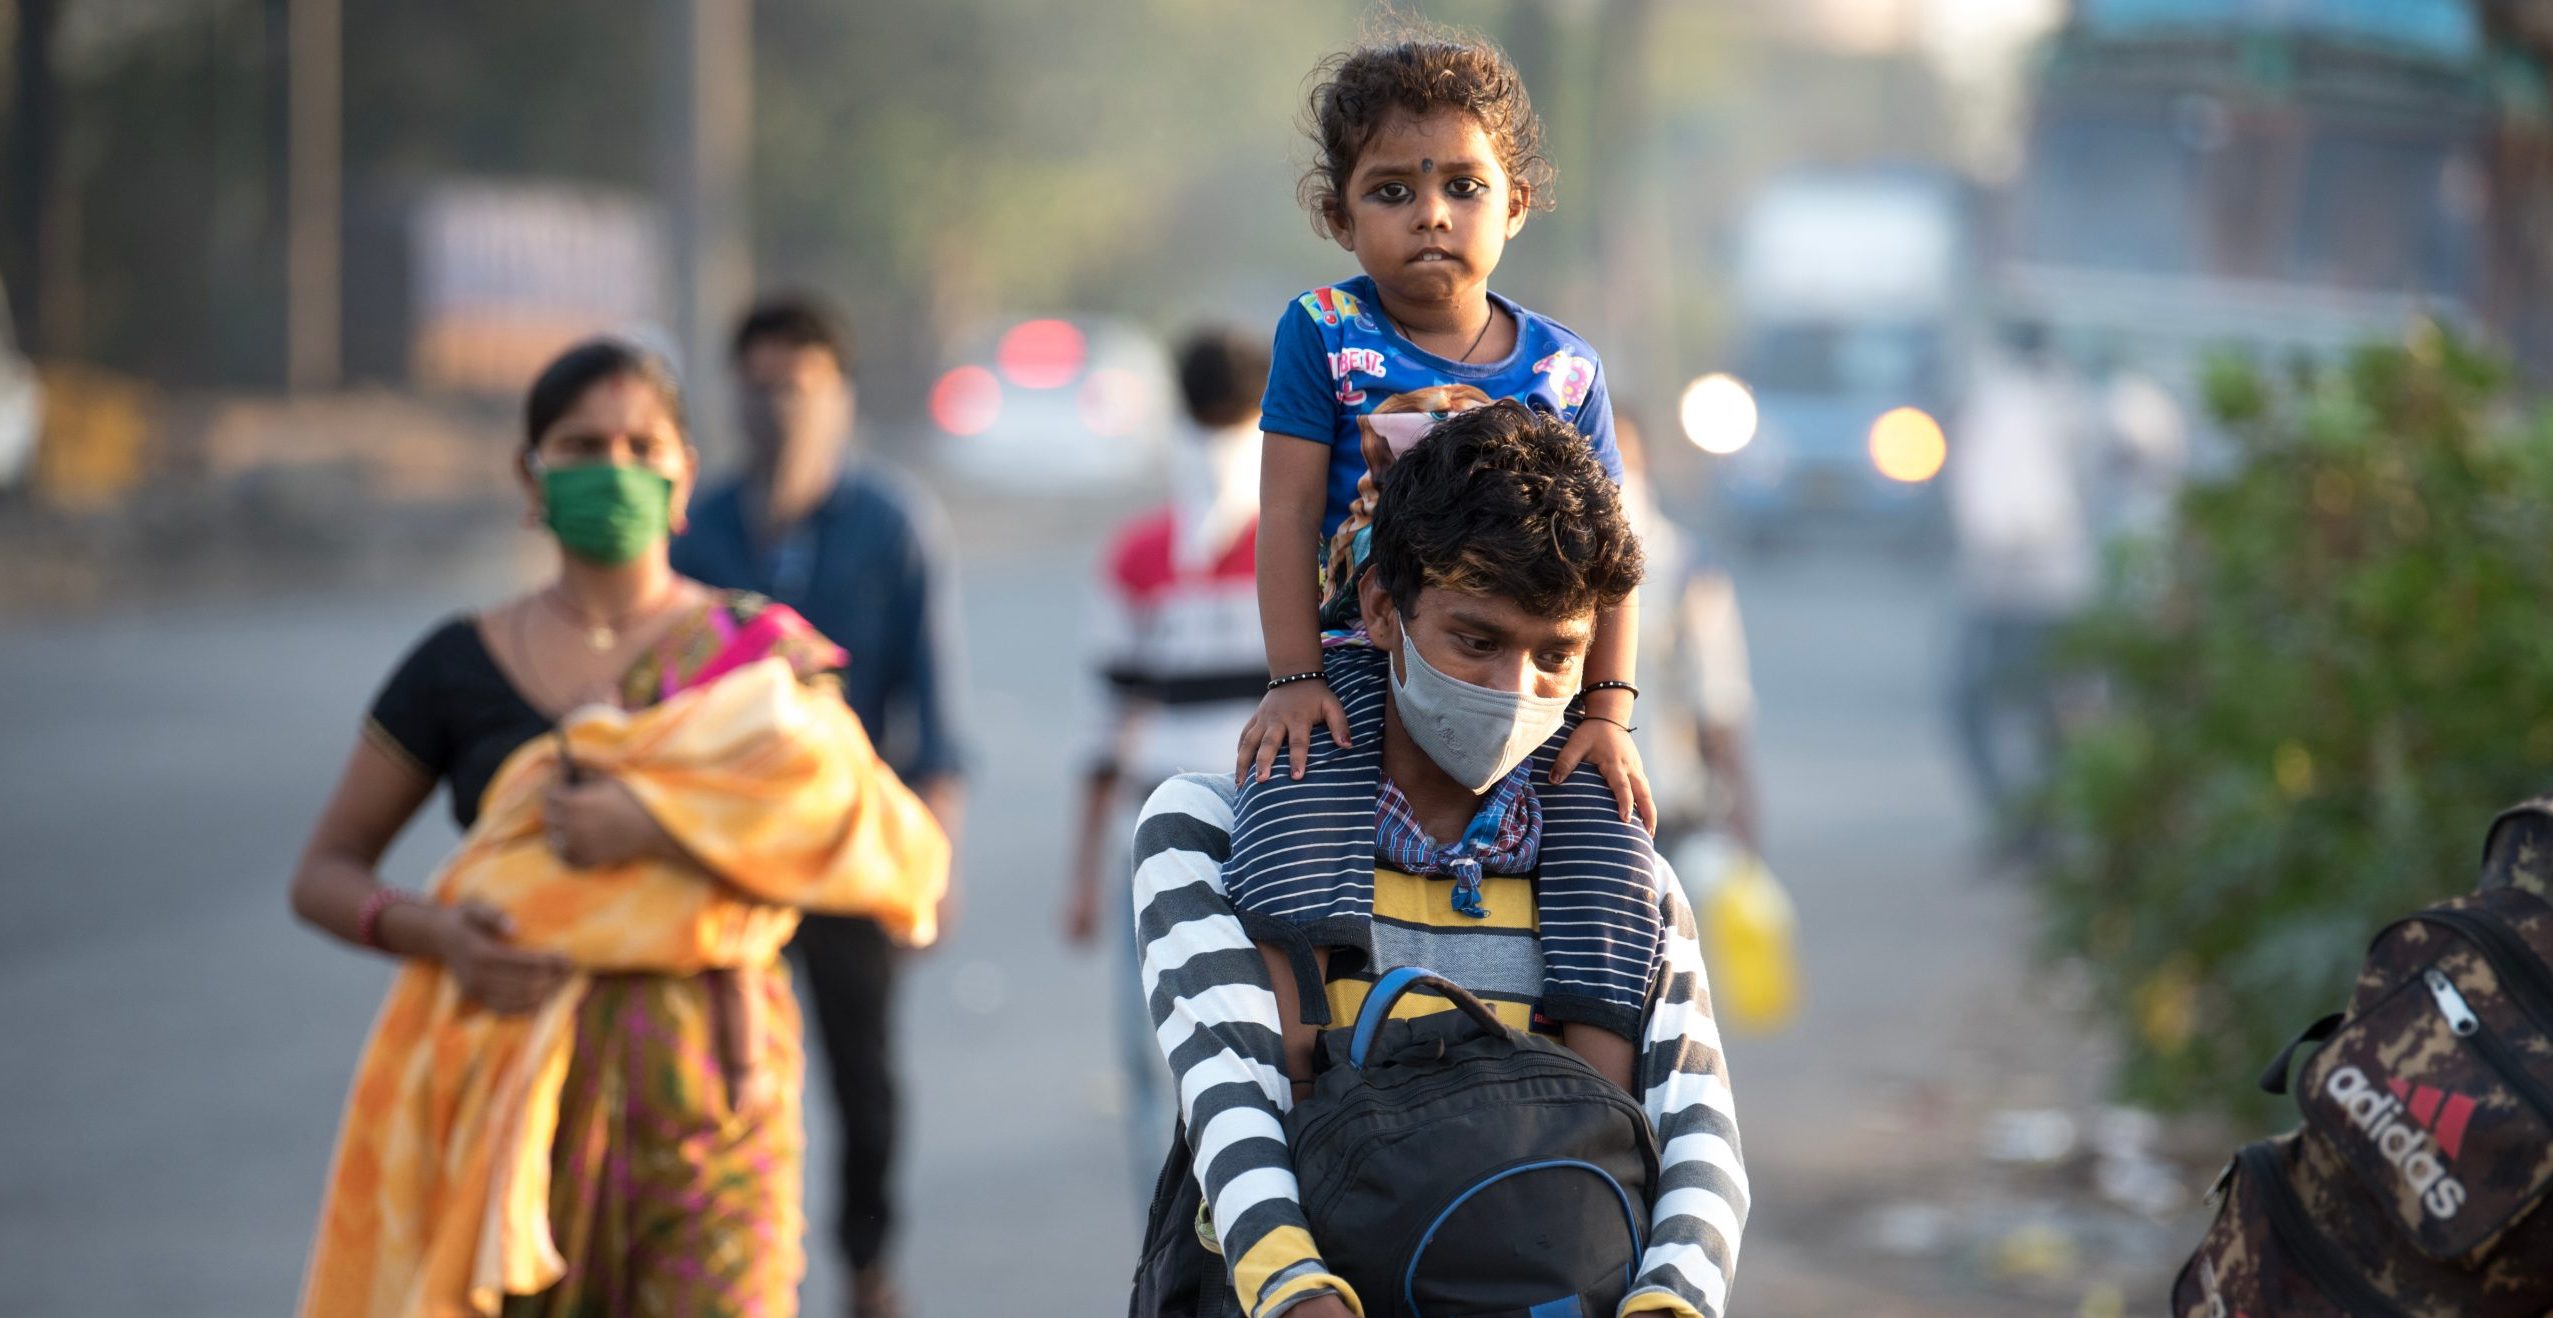 Migrant workers in Mumbai walk on the highway as they journey back home during a nationwide lockdown in May 2020. Photo by Manoej Paateel/ Shutterstock.com.